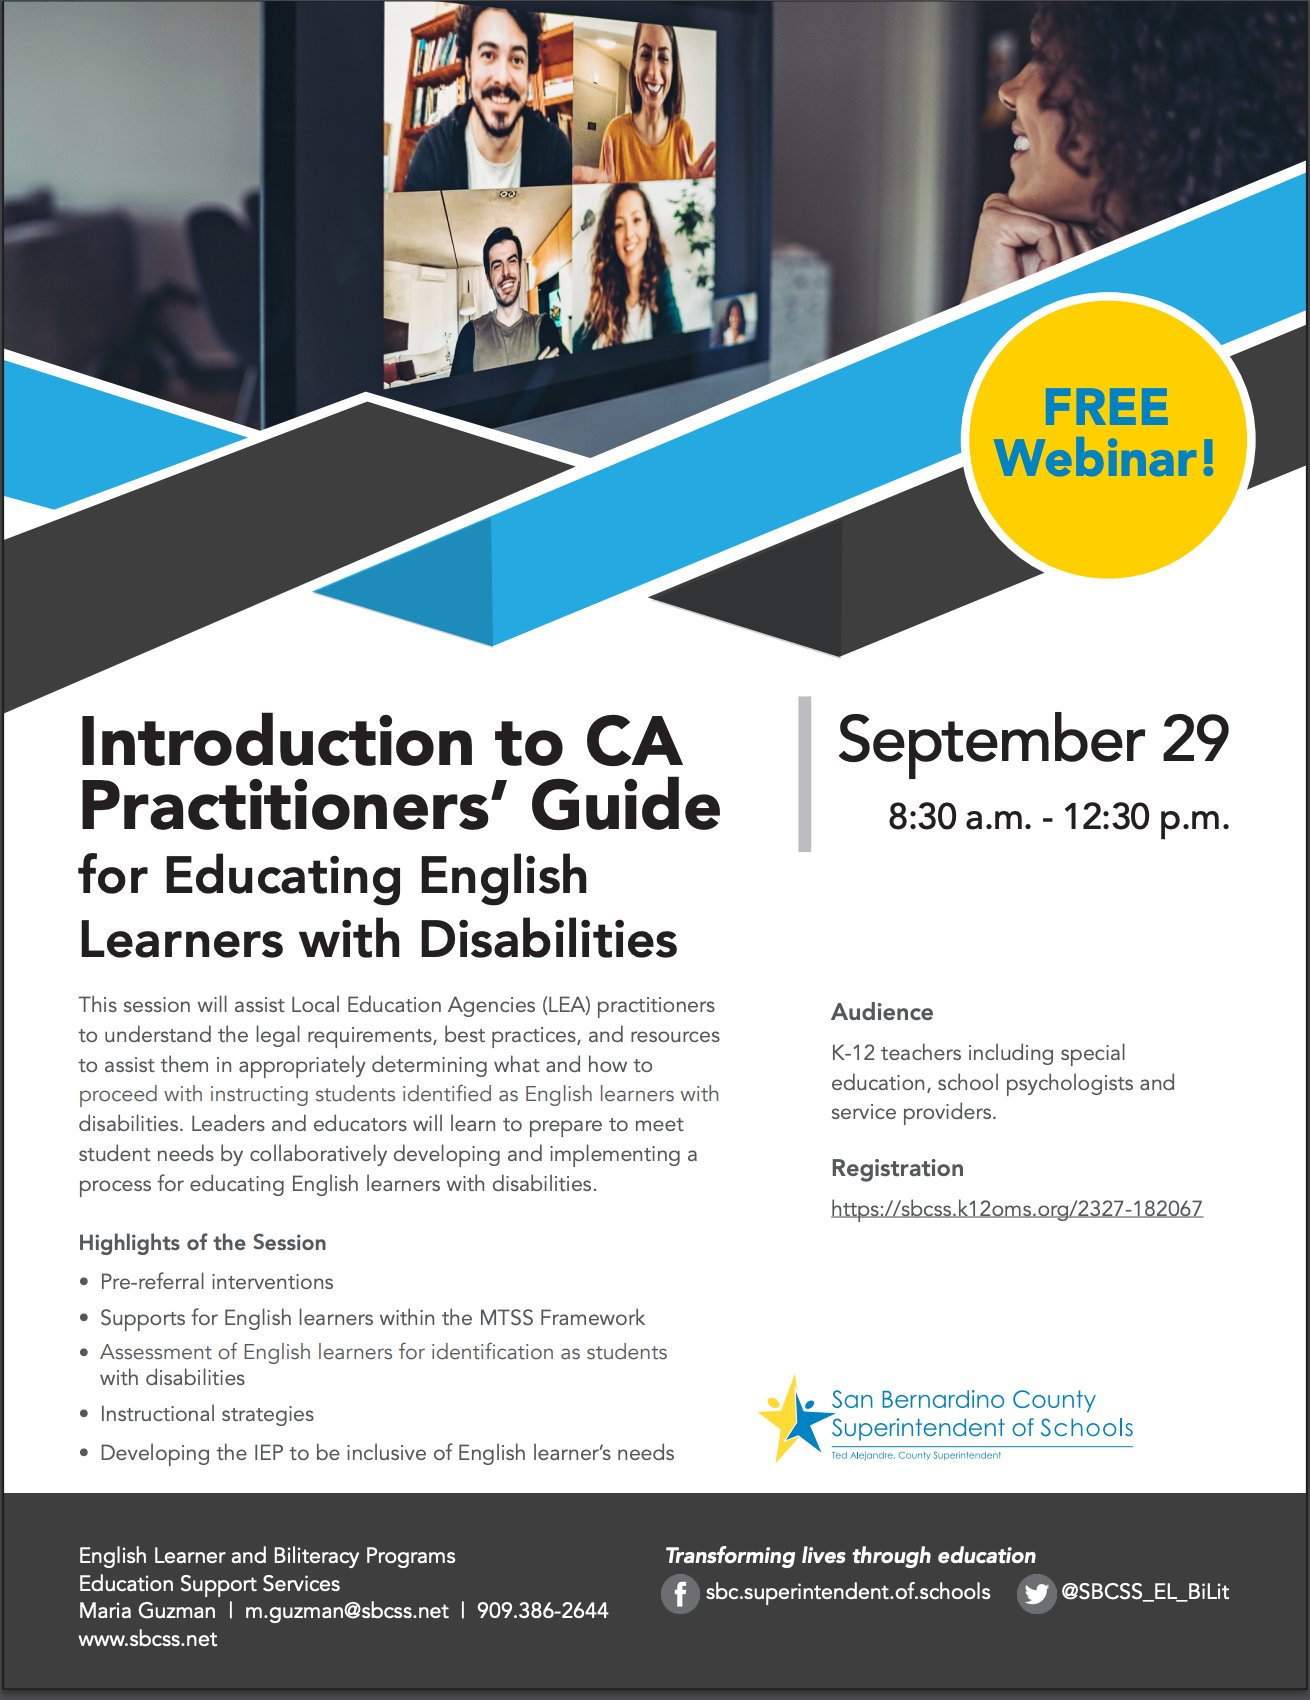 Introduction to CA Practitioners’ Guide for Educating English Learners with Disabilities